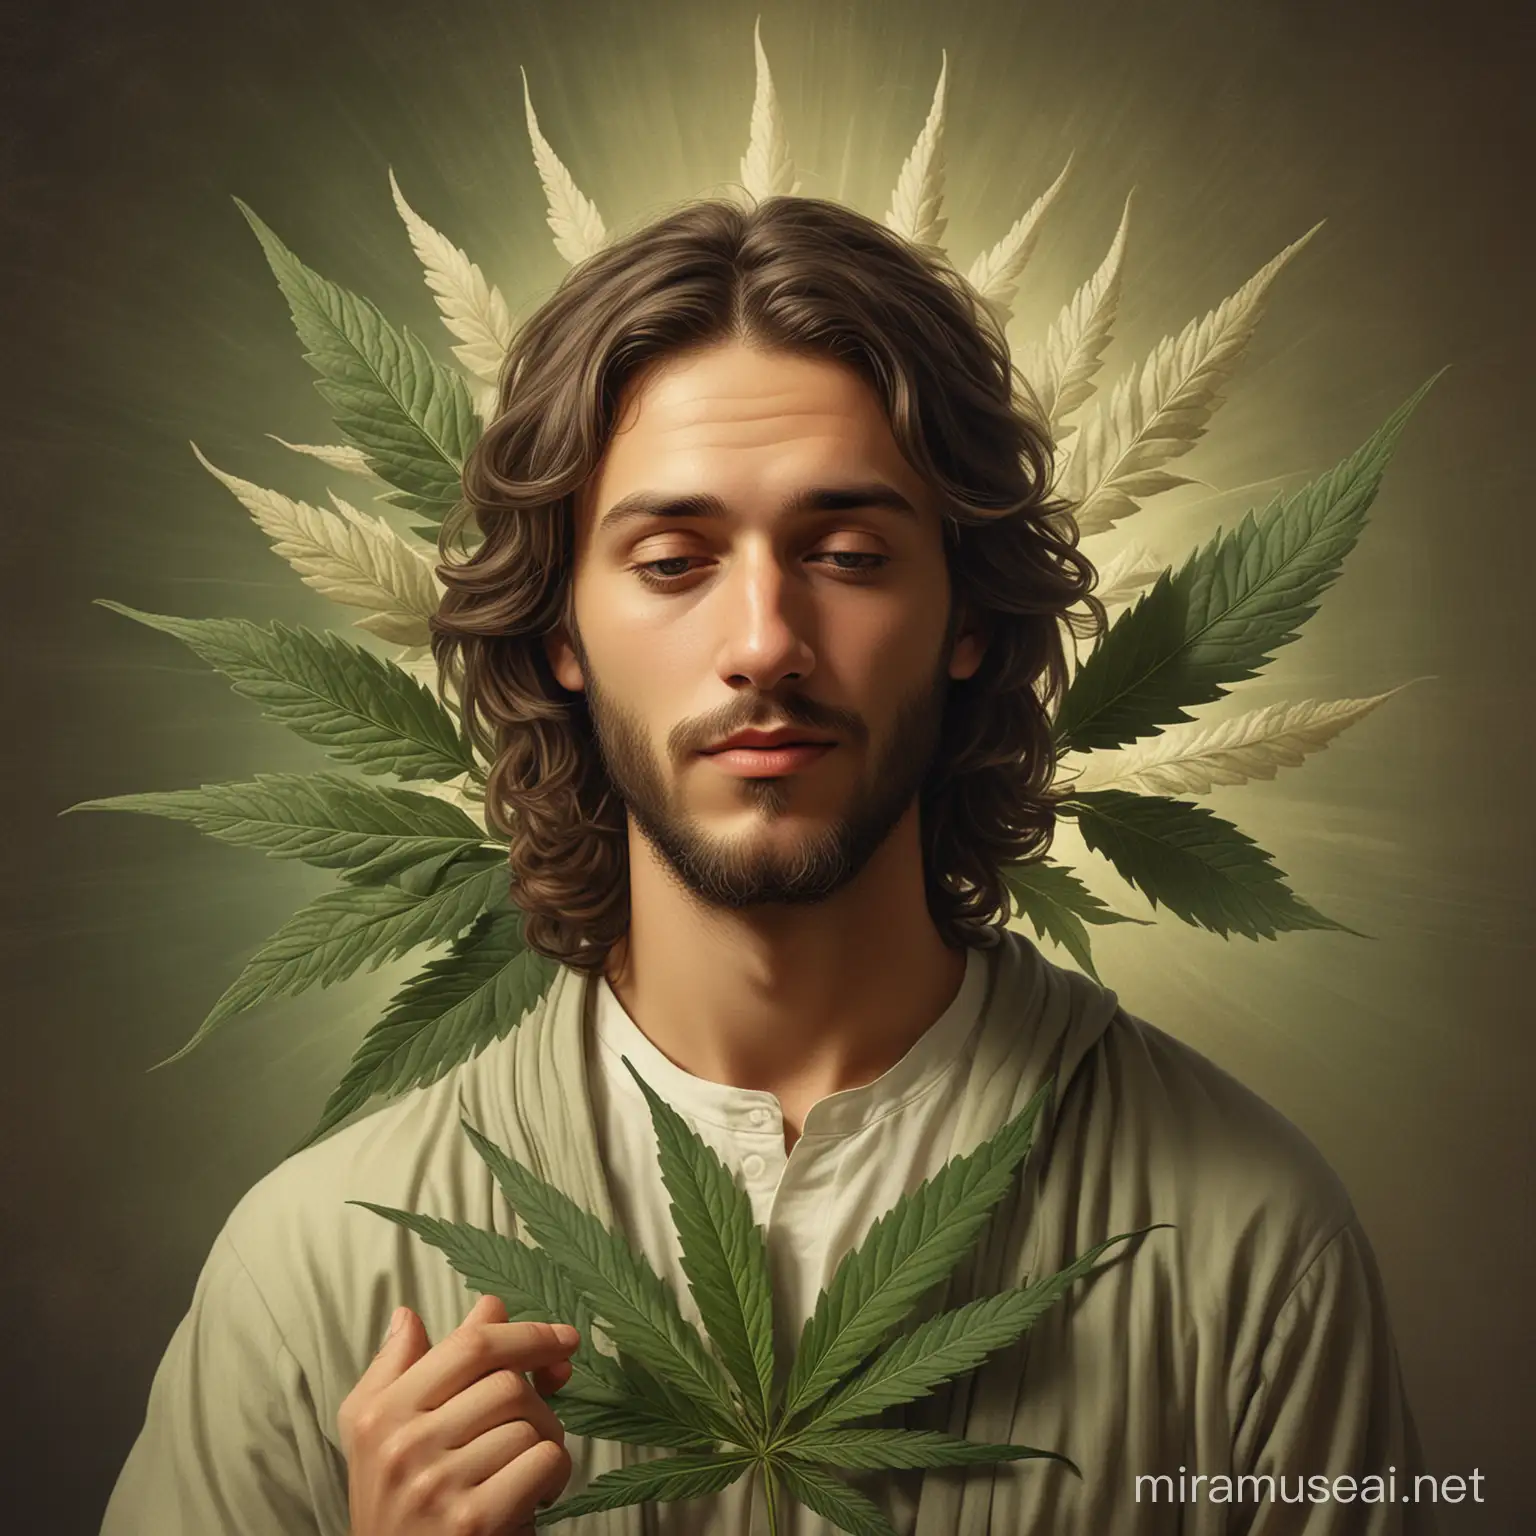 Authentic Biblical Depiction of Cannabis Use